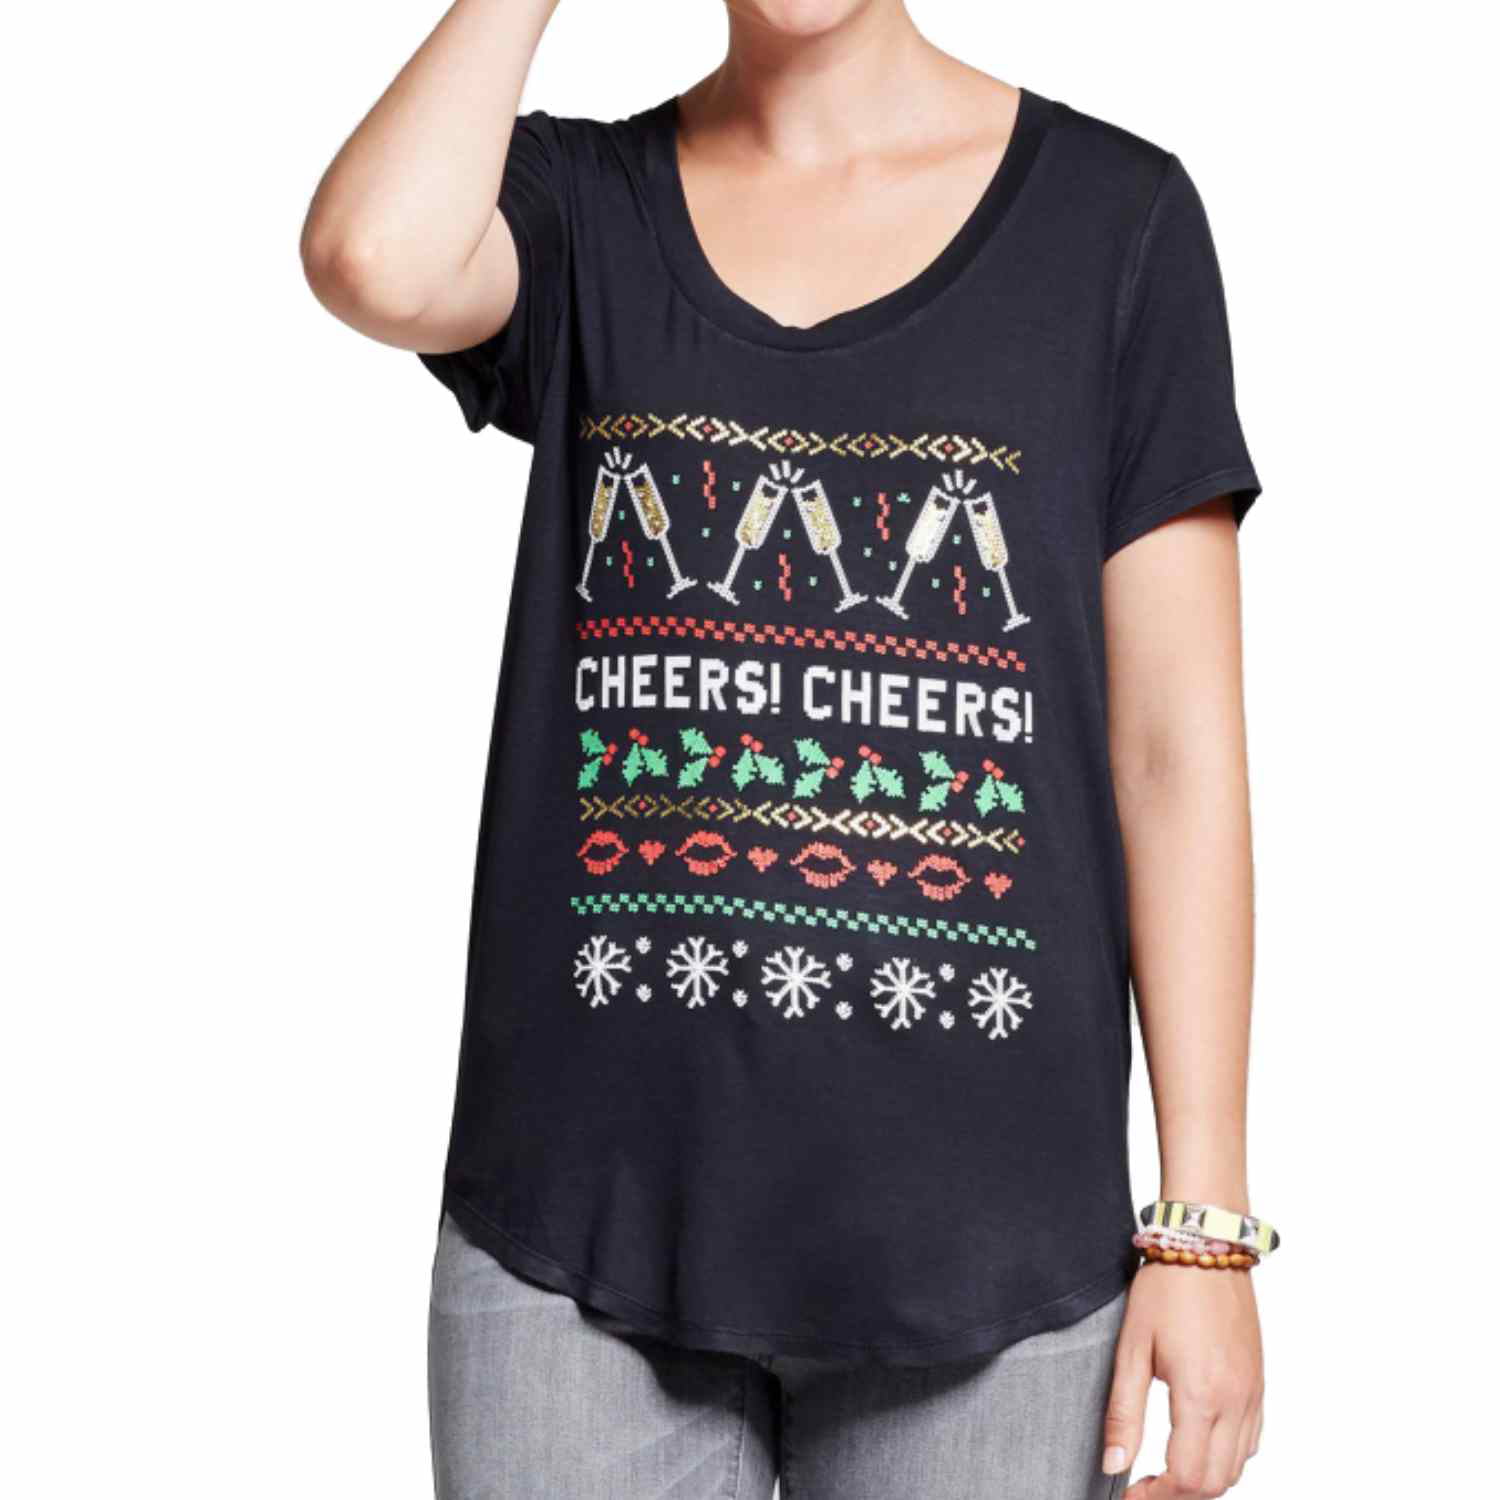 Lutos Women Merry Christmas Plus Size Cute Short Sleeve Christmas Graphic Shirts Tree Print Holiday Shirts Tops Blouse